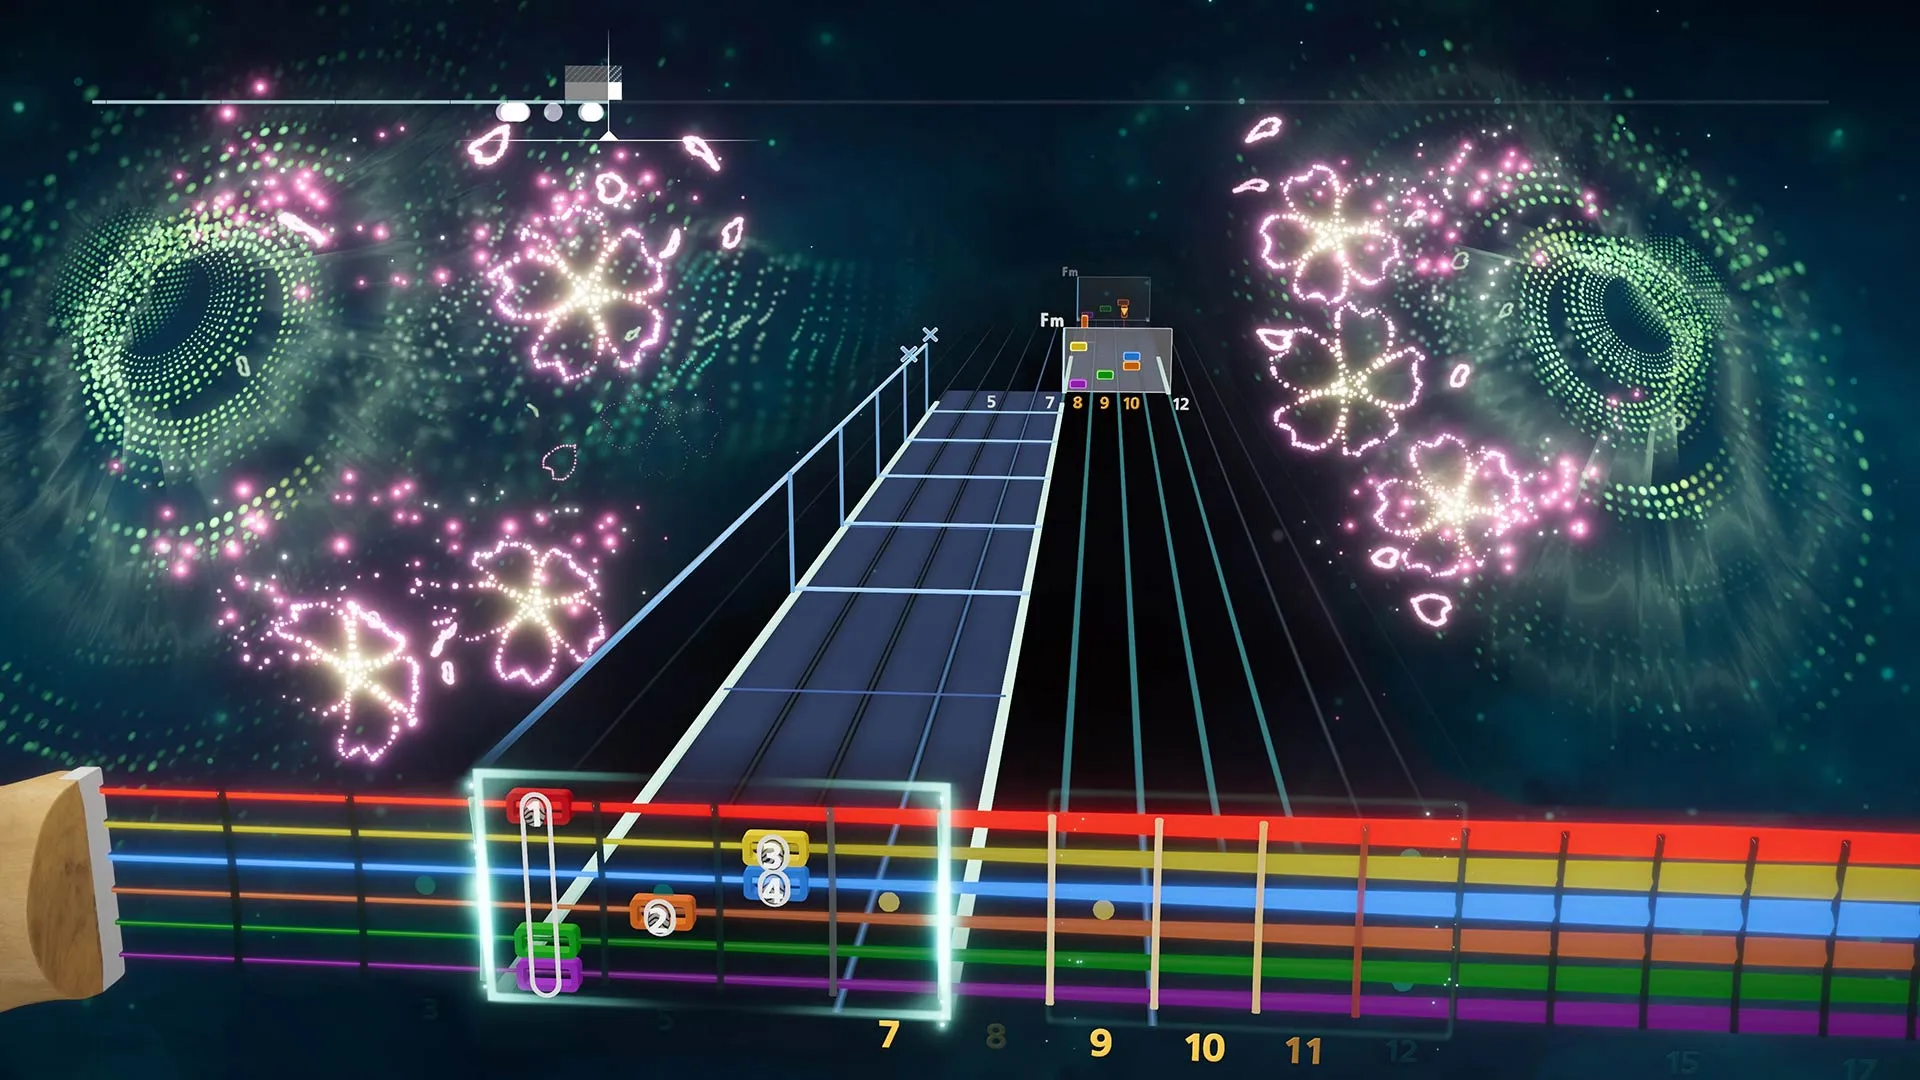 Rocksmith+ will launch with more than 5,000 songs